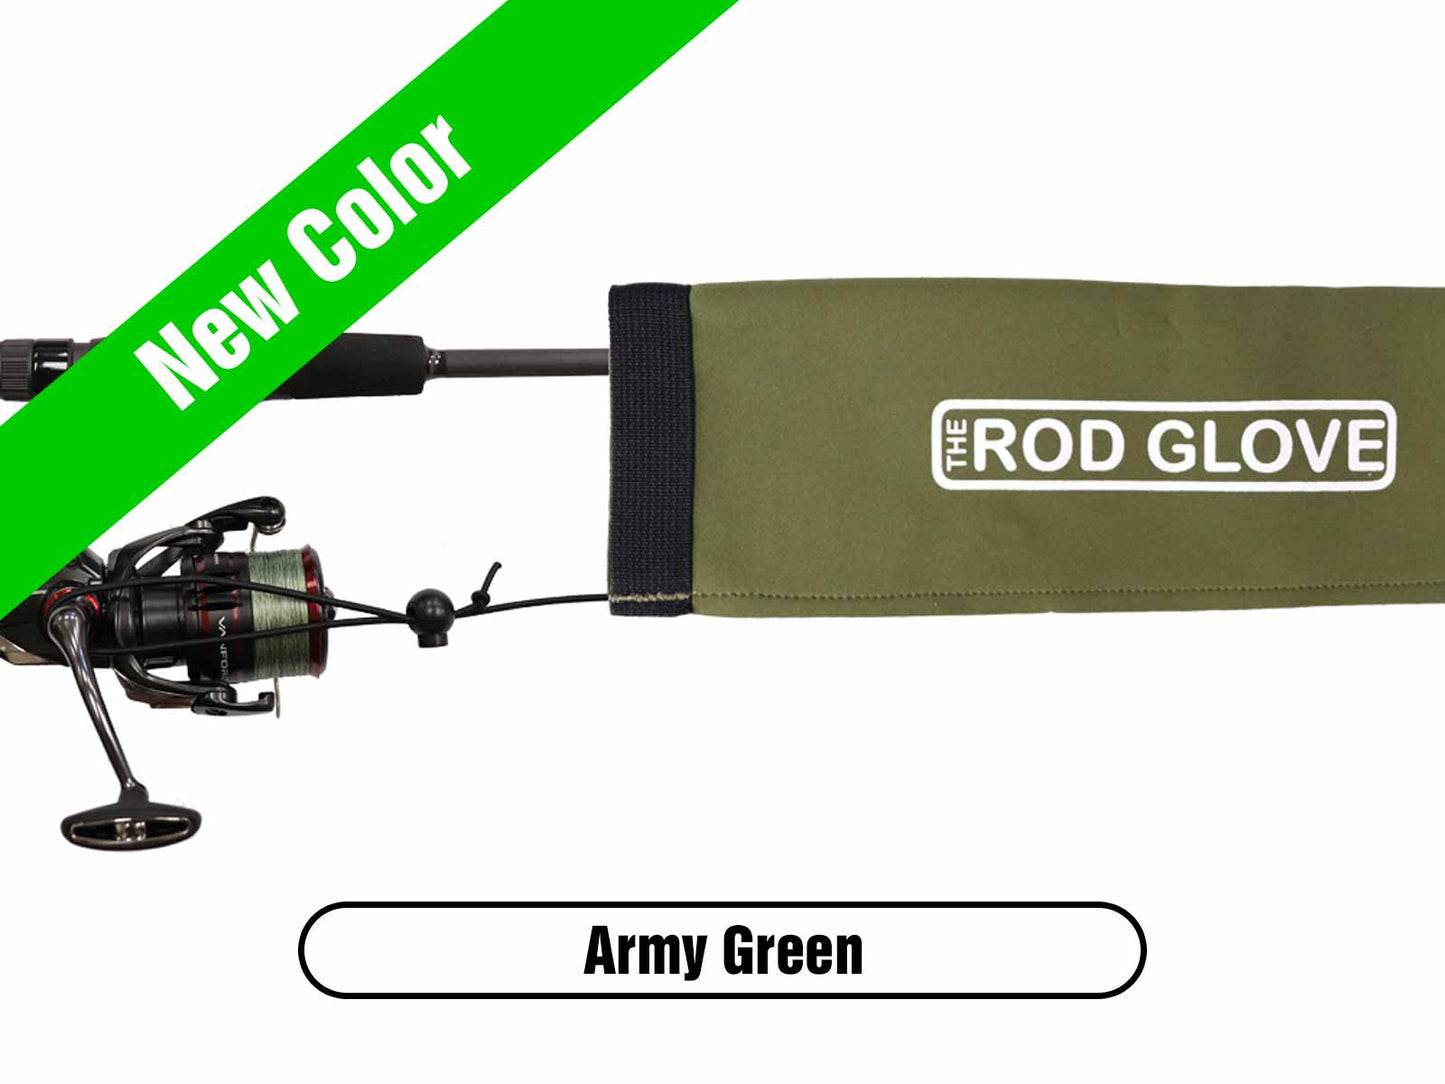 Tournament-Series-spinning-Rod-Glove-army-green